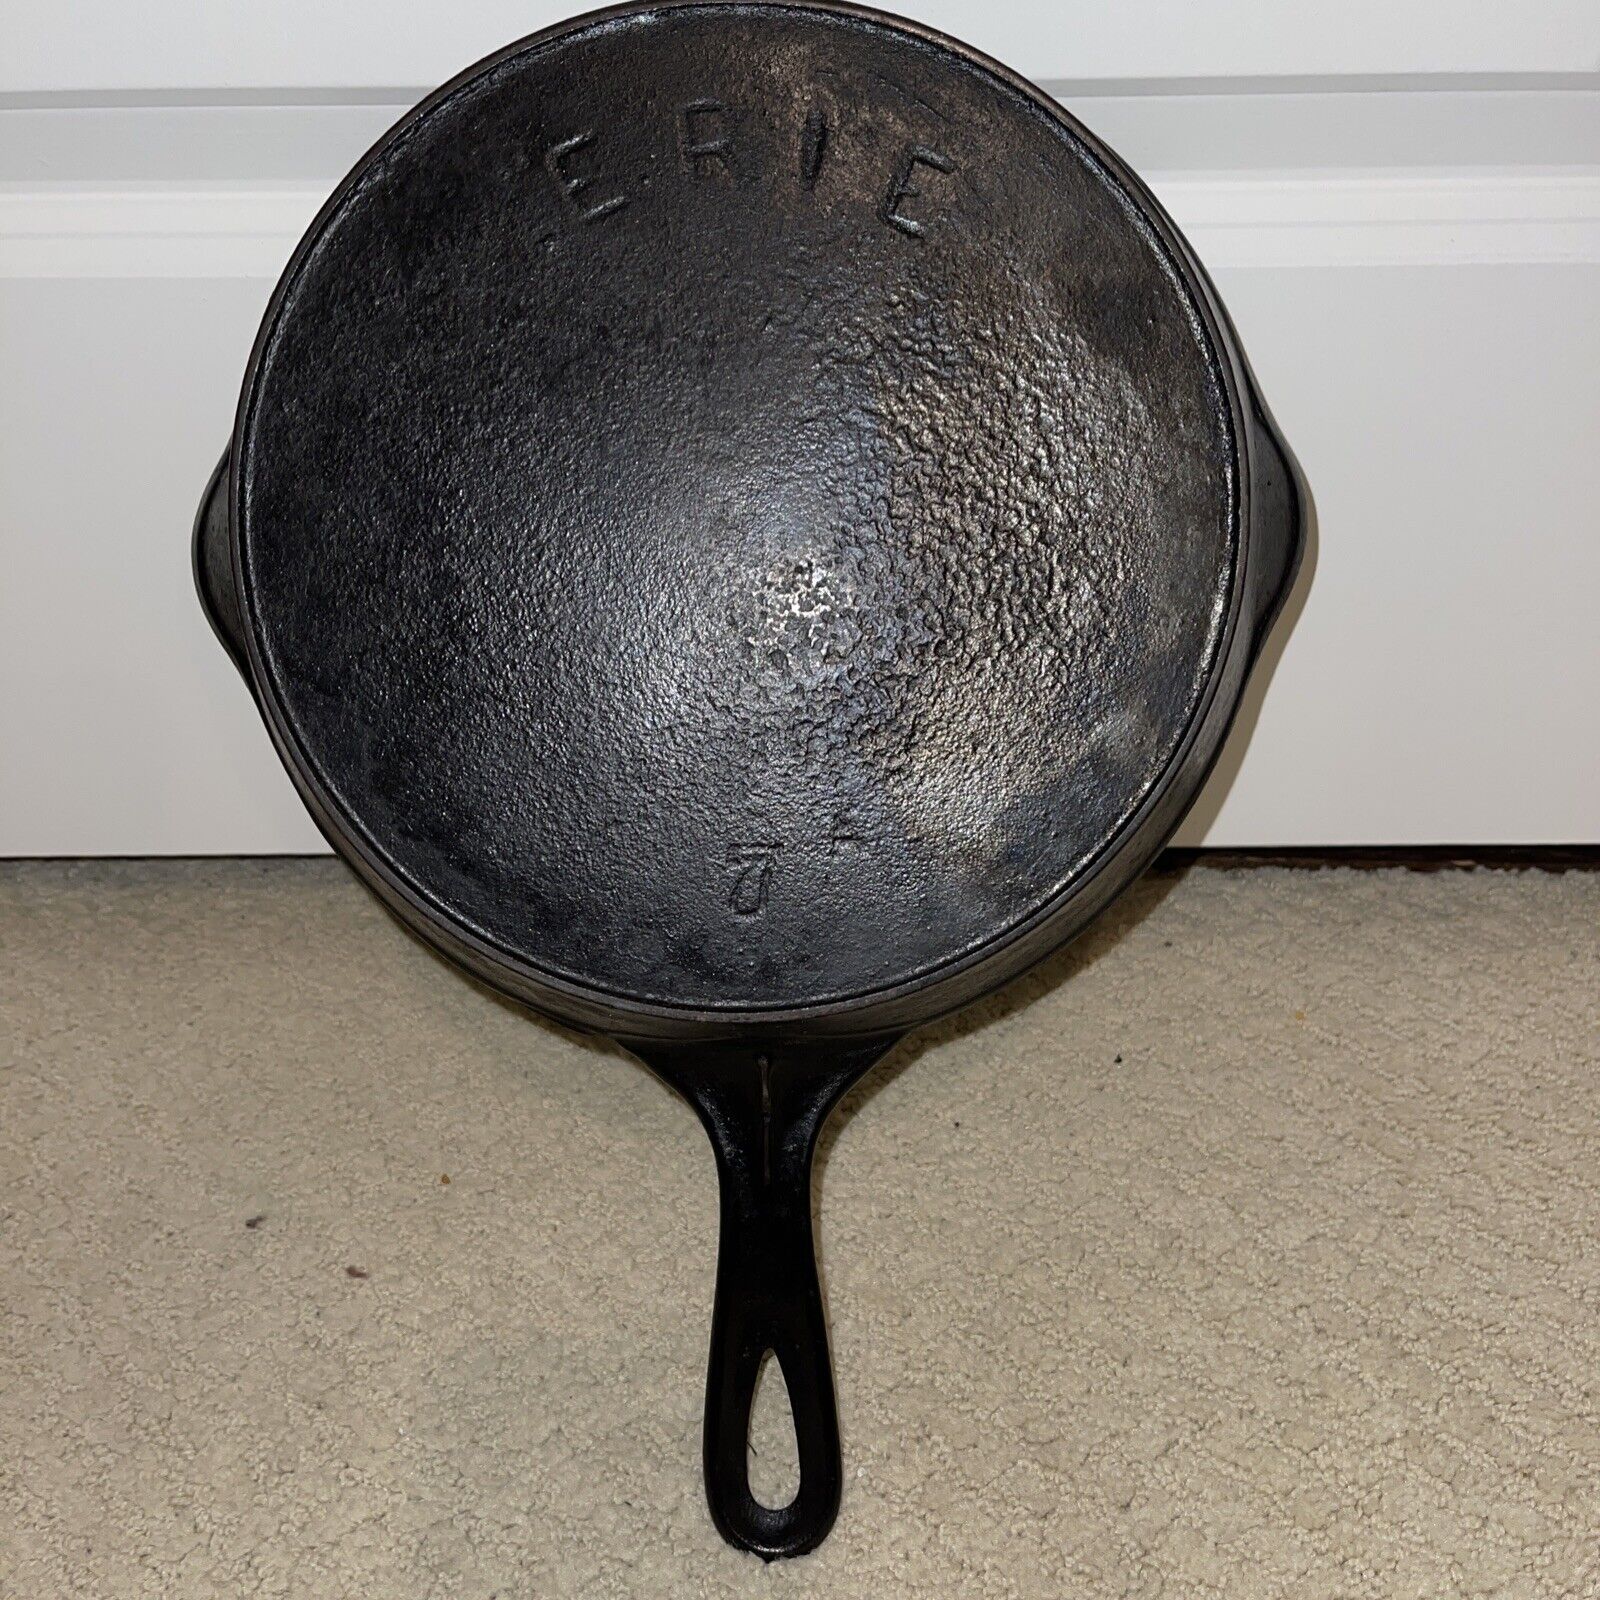 Rare Antique 3rd Series ERIE #7 A Cast Iron Skillet w/Heat Ring and Makers Mark?